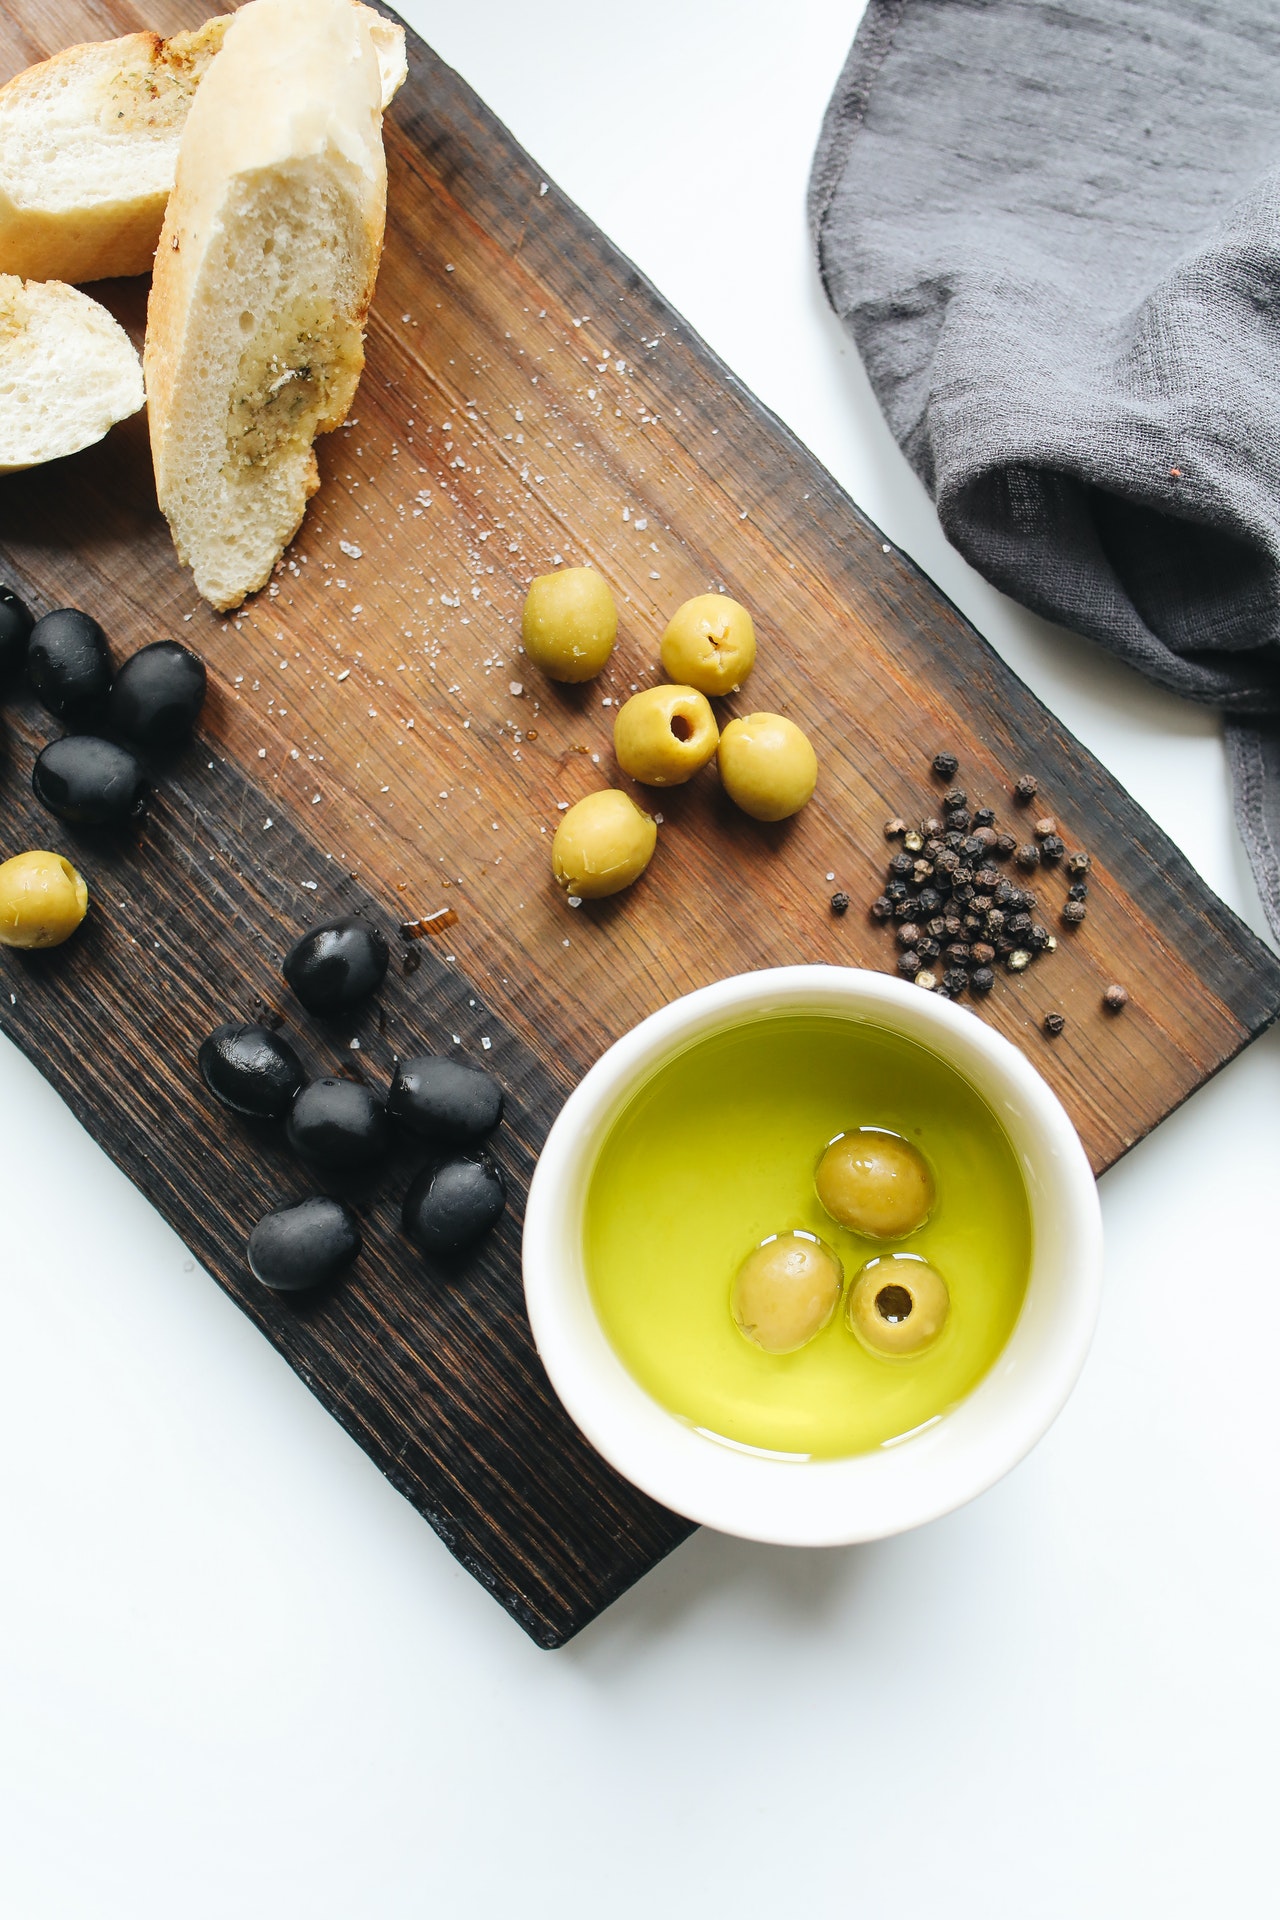 Olive oil in ancient and modern Greece